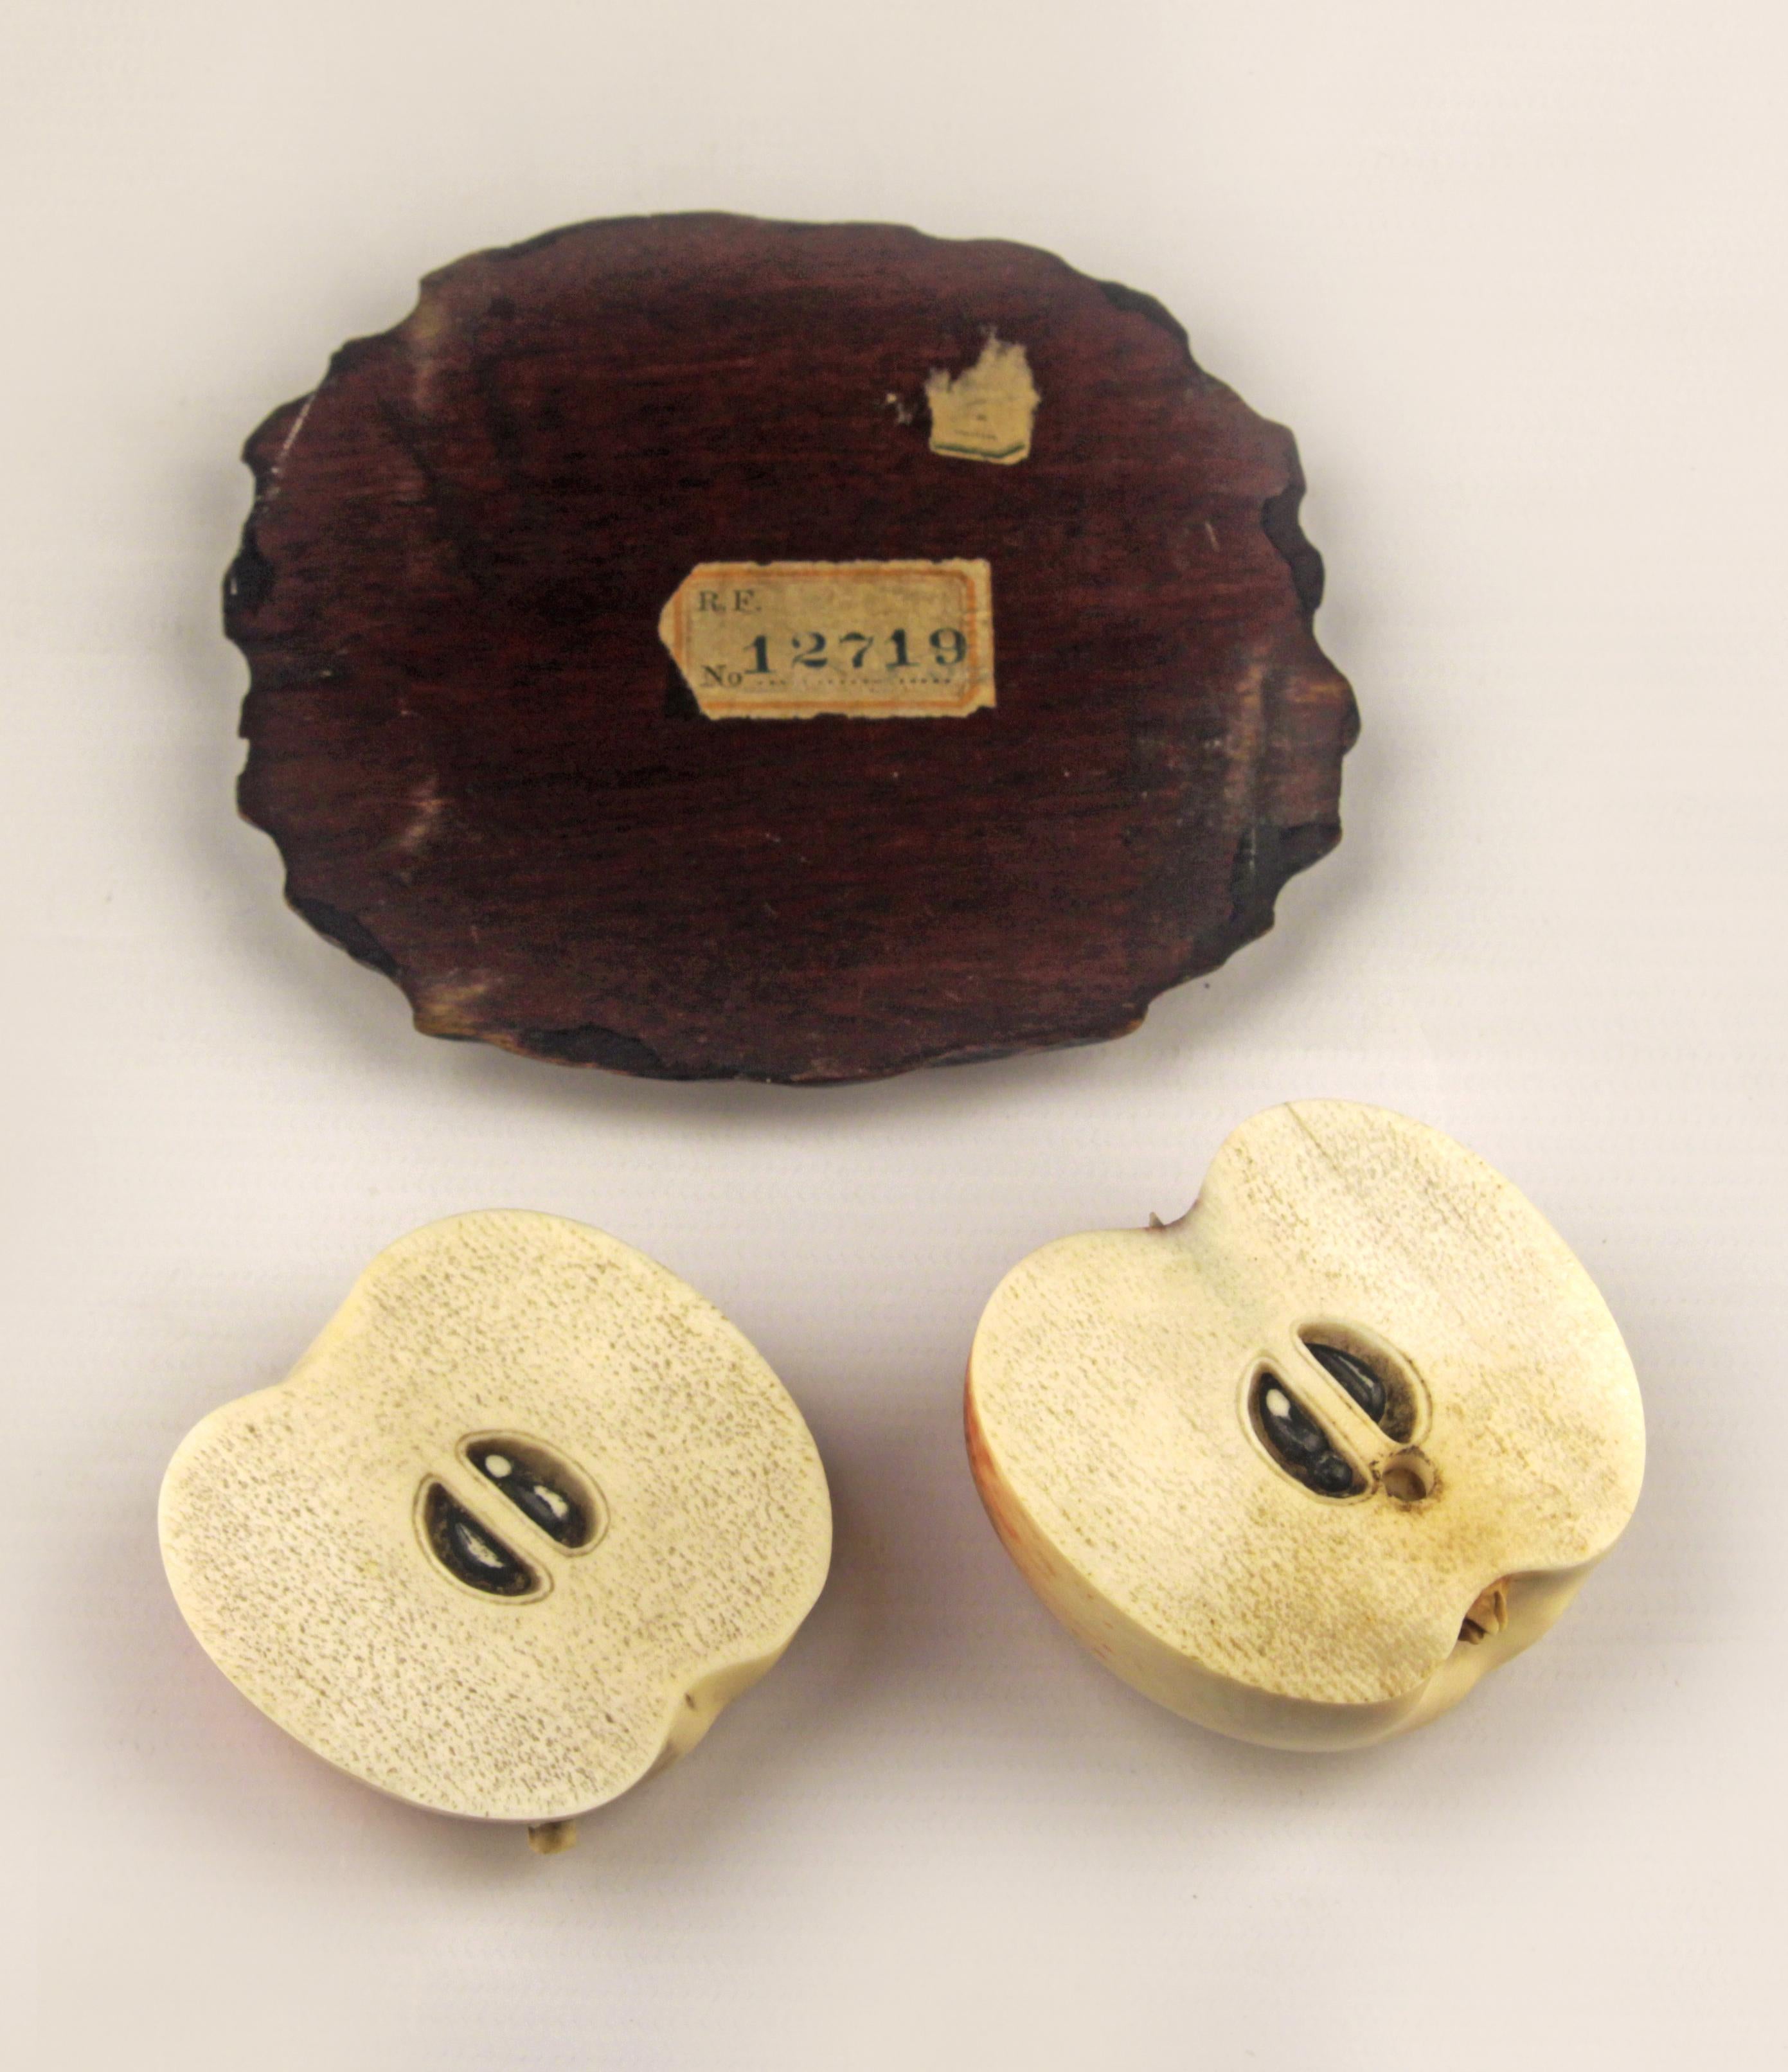 Okimono Set of Carved Red Apple-Shapped Ivory Figurines with a Wooden Brown Base In Fair Condition For Sale In North Miami, FL